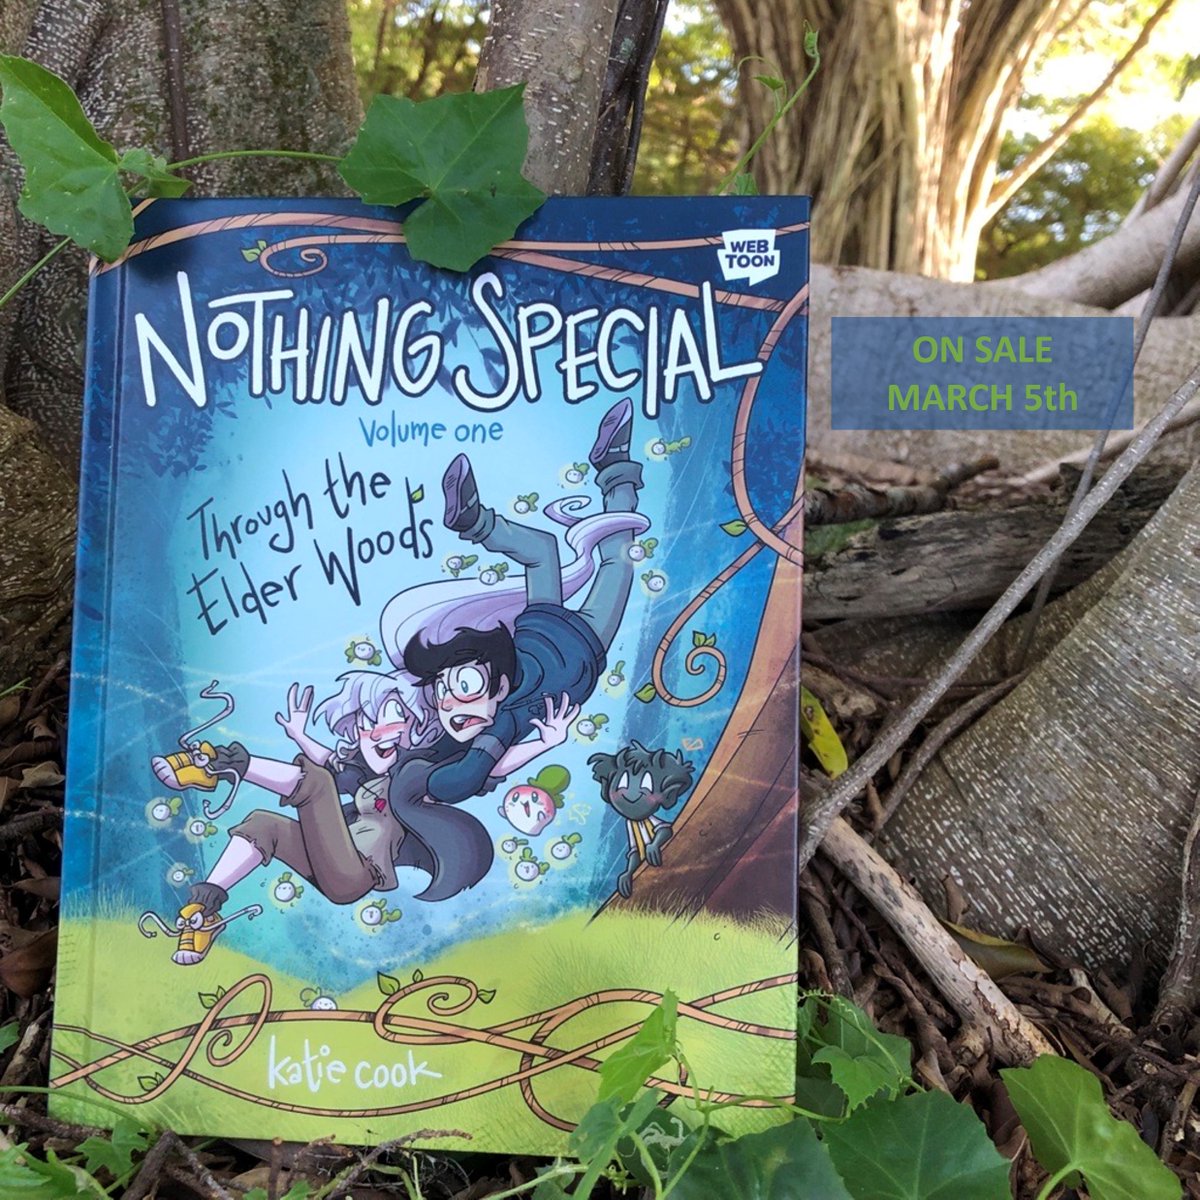 Nothing Special: Volume 1 Through the Elder Woods by @katiecandraw

Two not-so-human teenagers and a friendly ghost radish face the fantasy adventure of a lifetime in this captivating graphic novel, featuring exclusive behind-the-scenes material

@TenSpeedPress  @webtoonofficial